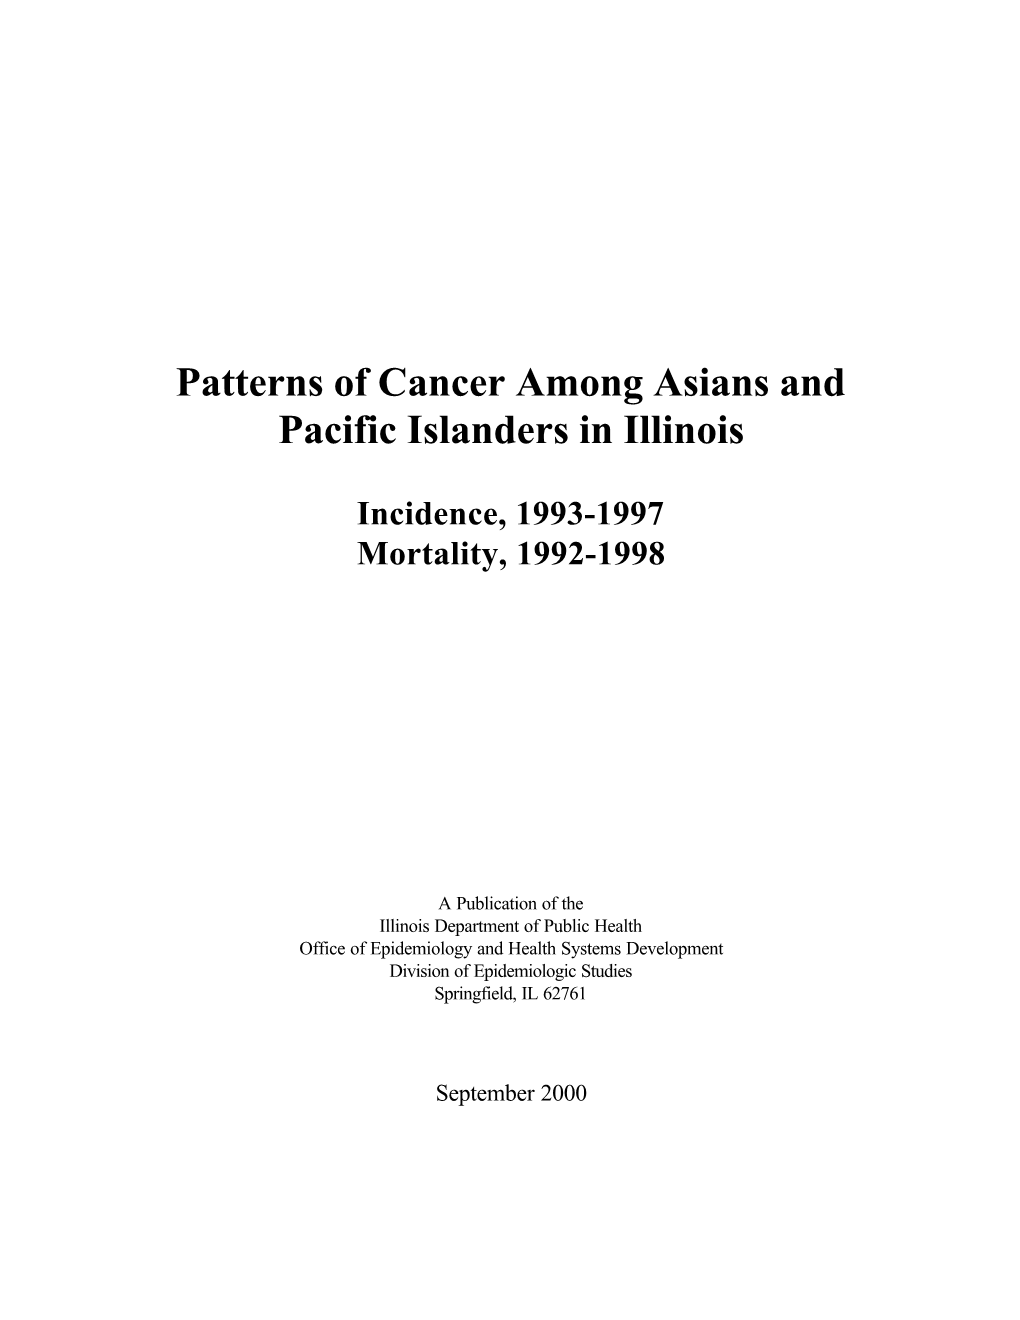 Patterns of Cancer Among Asians and Pacific Islanders in Illinois